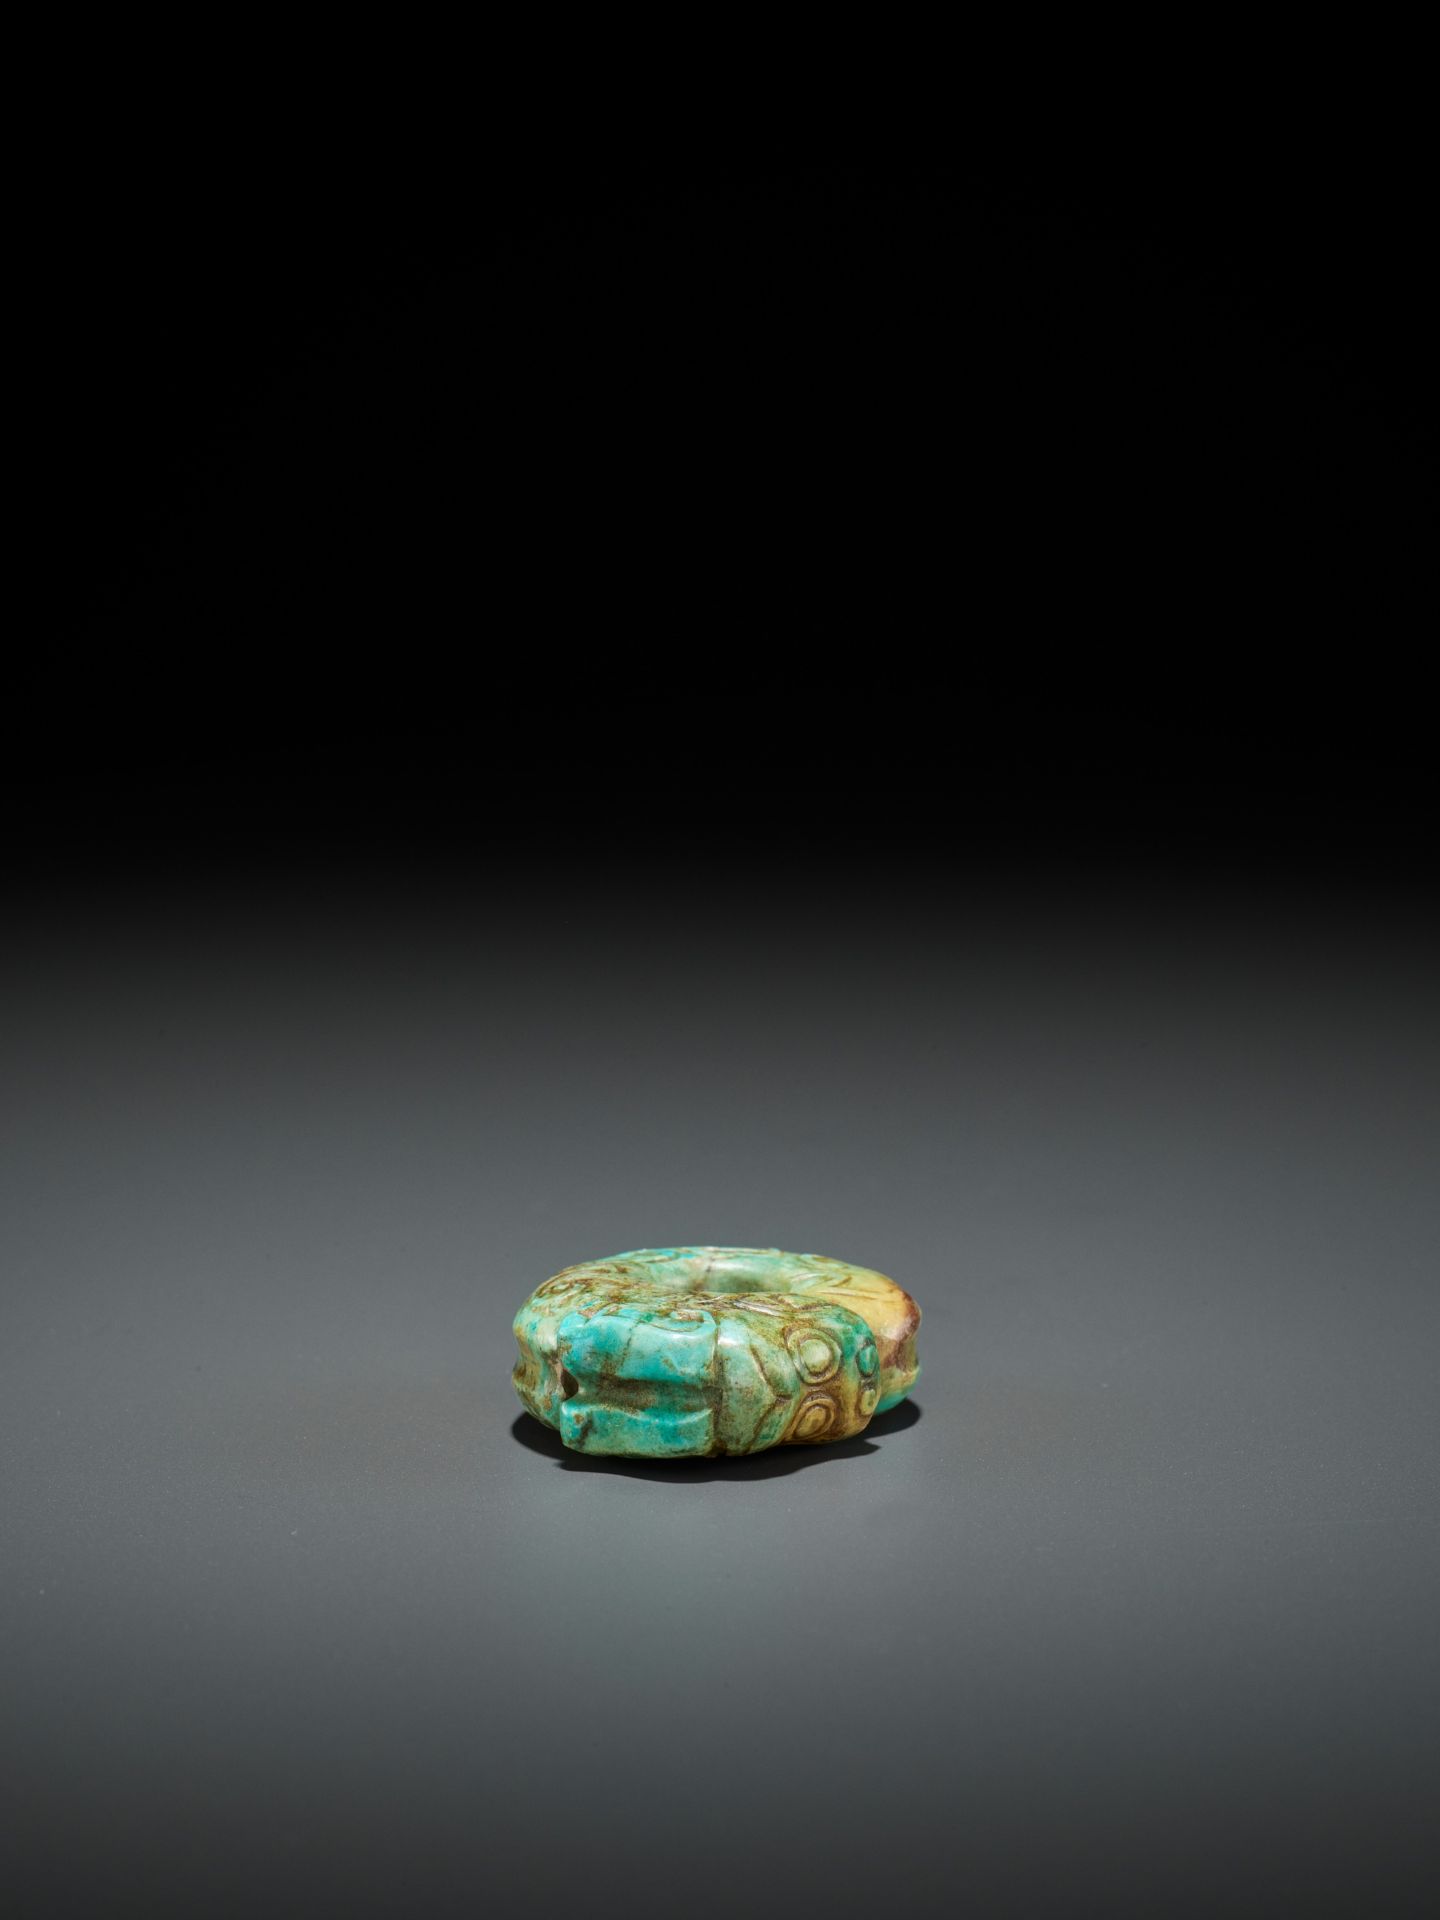 A TURQUOISE MATRIX 'PIG-DRAGON' PENDANT, SHANG TO WESTERN ZHOU DYNASTY - Image 14 of 14